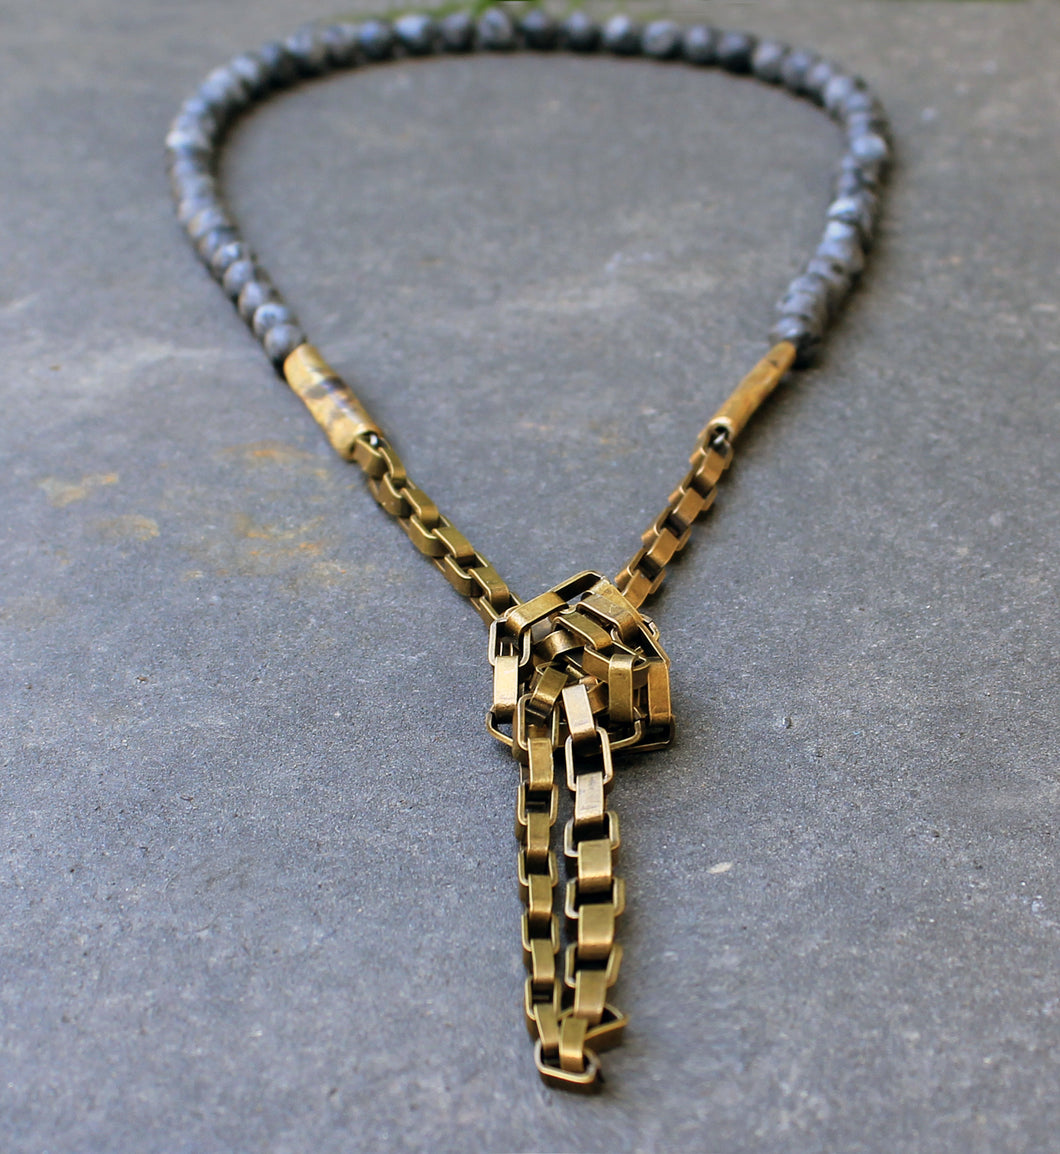 Nolla Necklace - Long Stone and Bronze Chain Necklace - MERCe